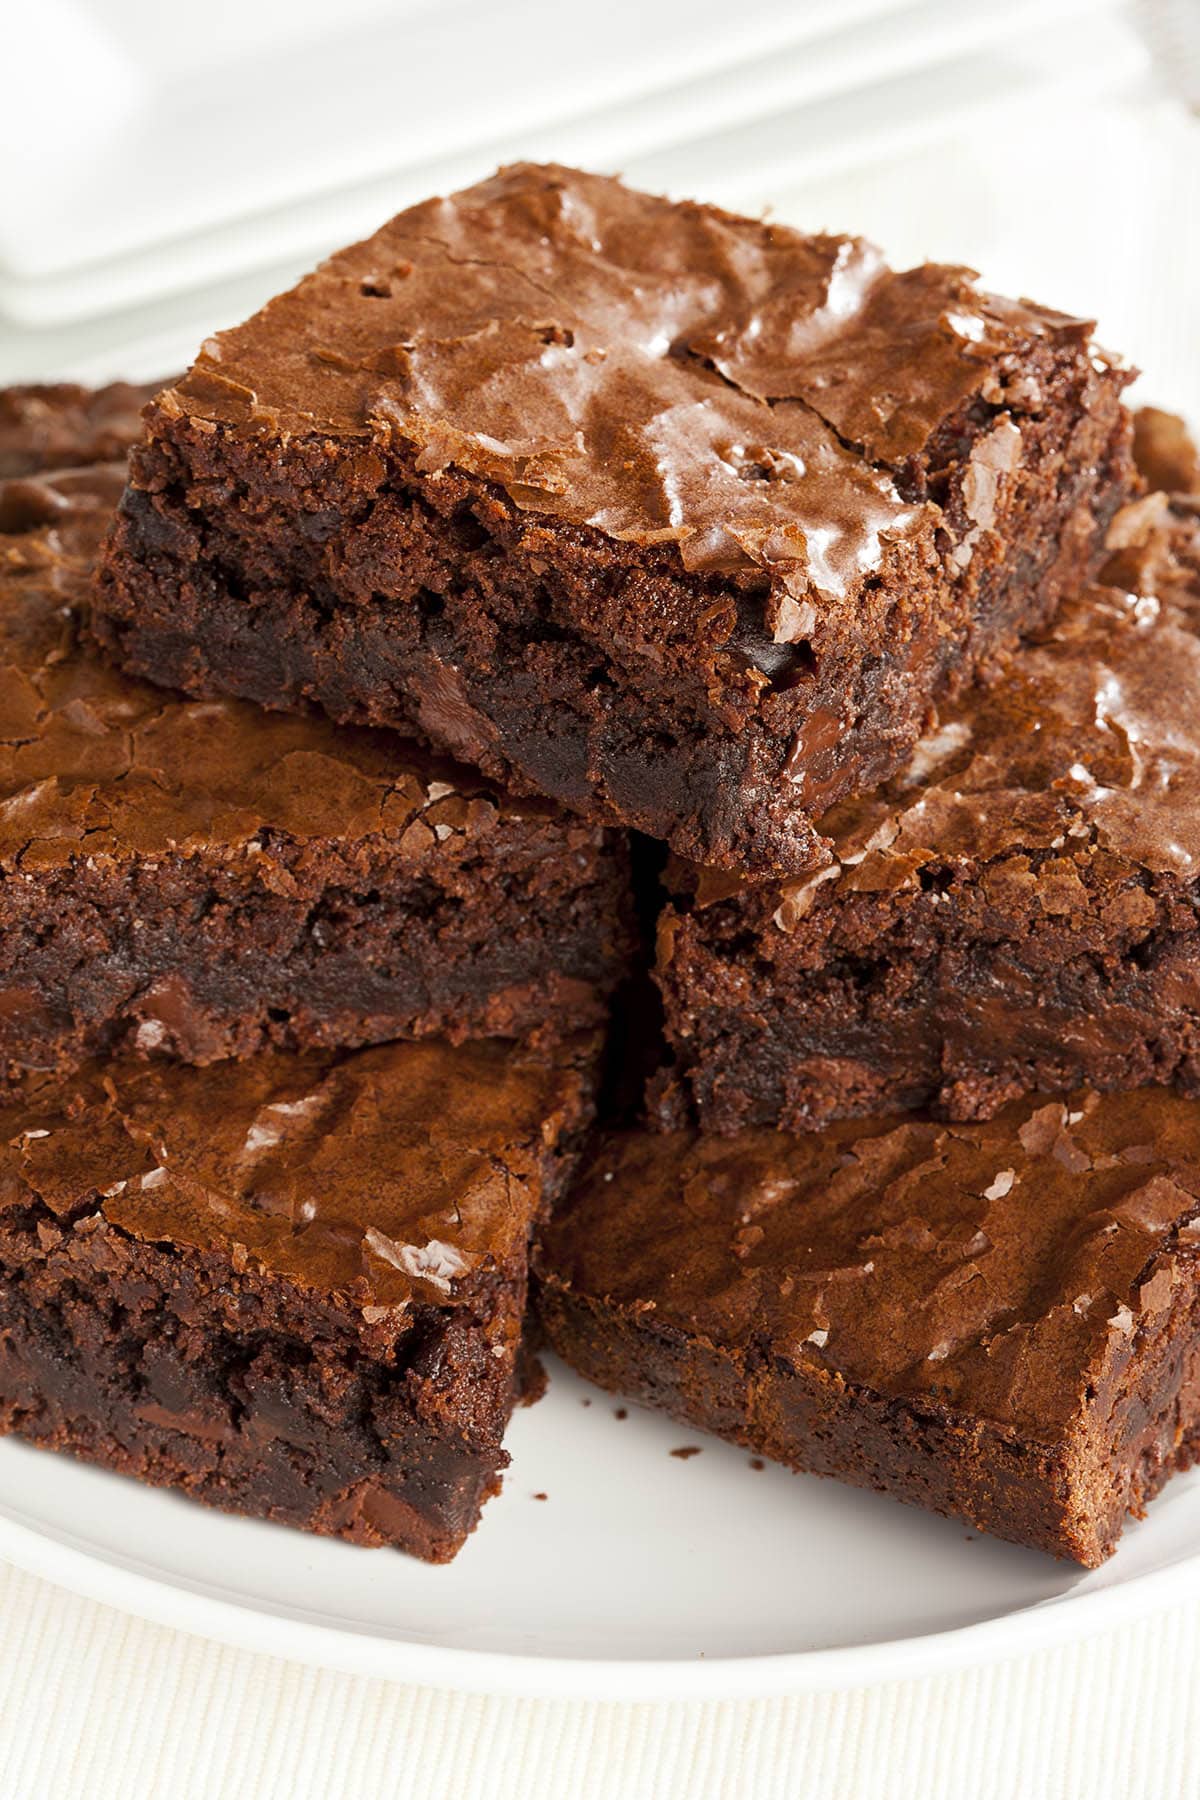 Brownies stacked on a white plate.